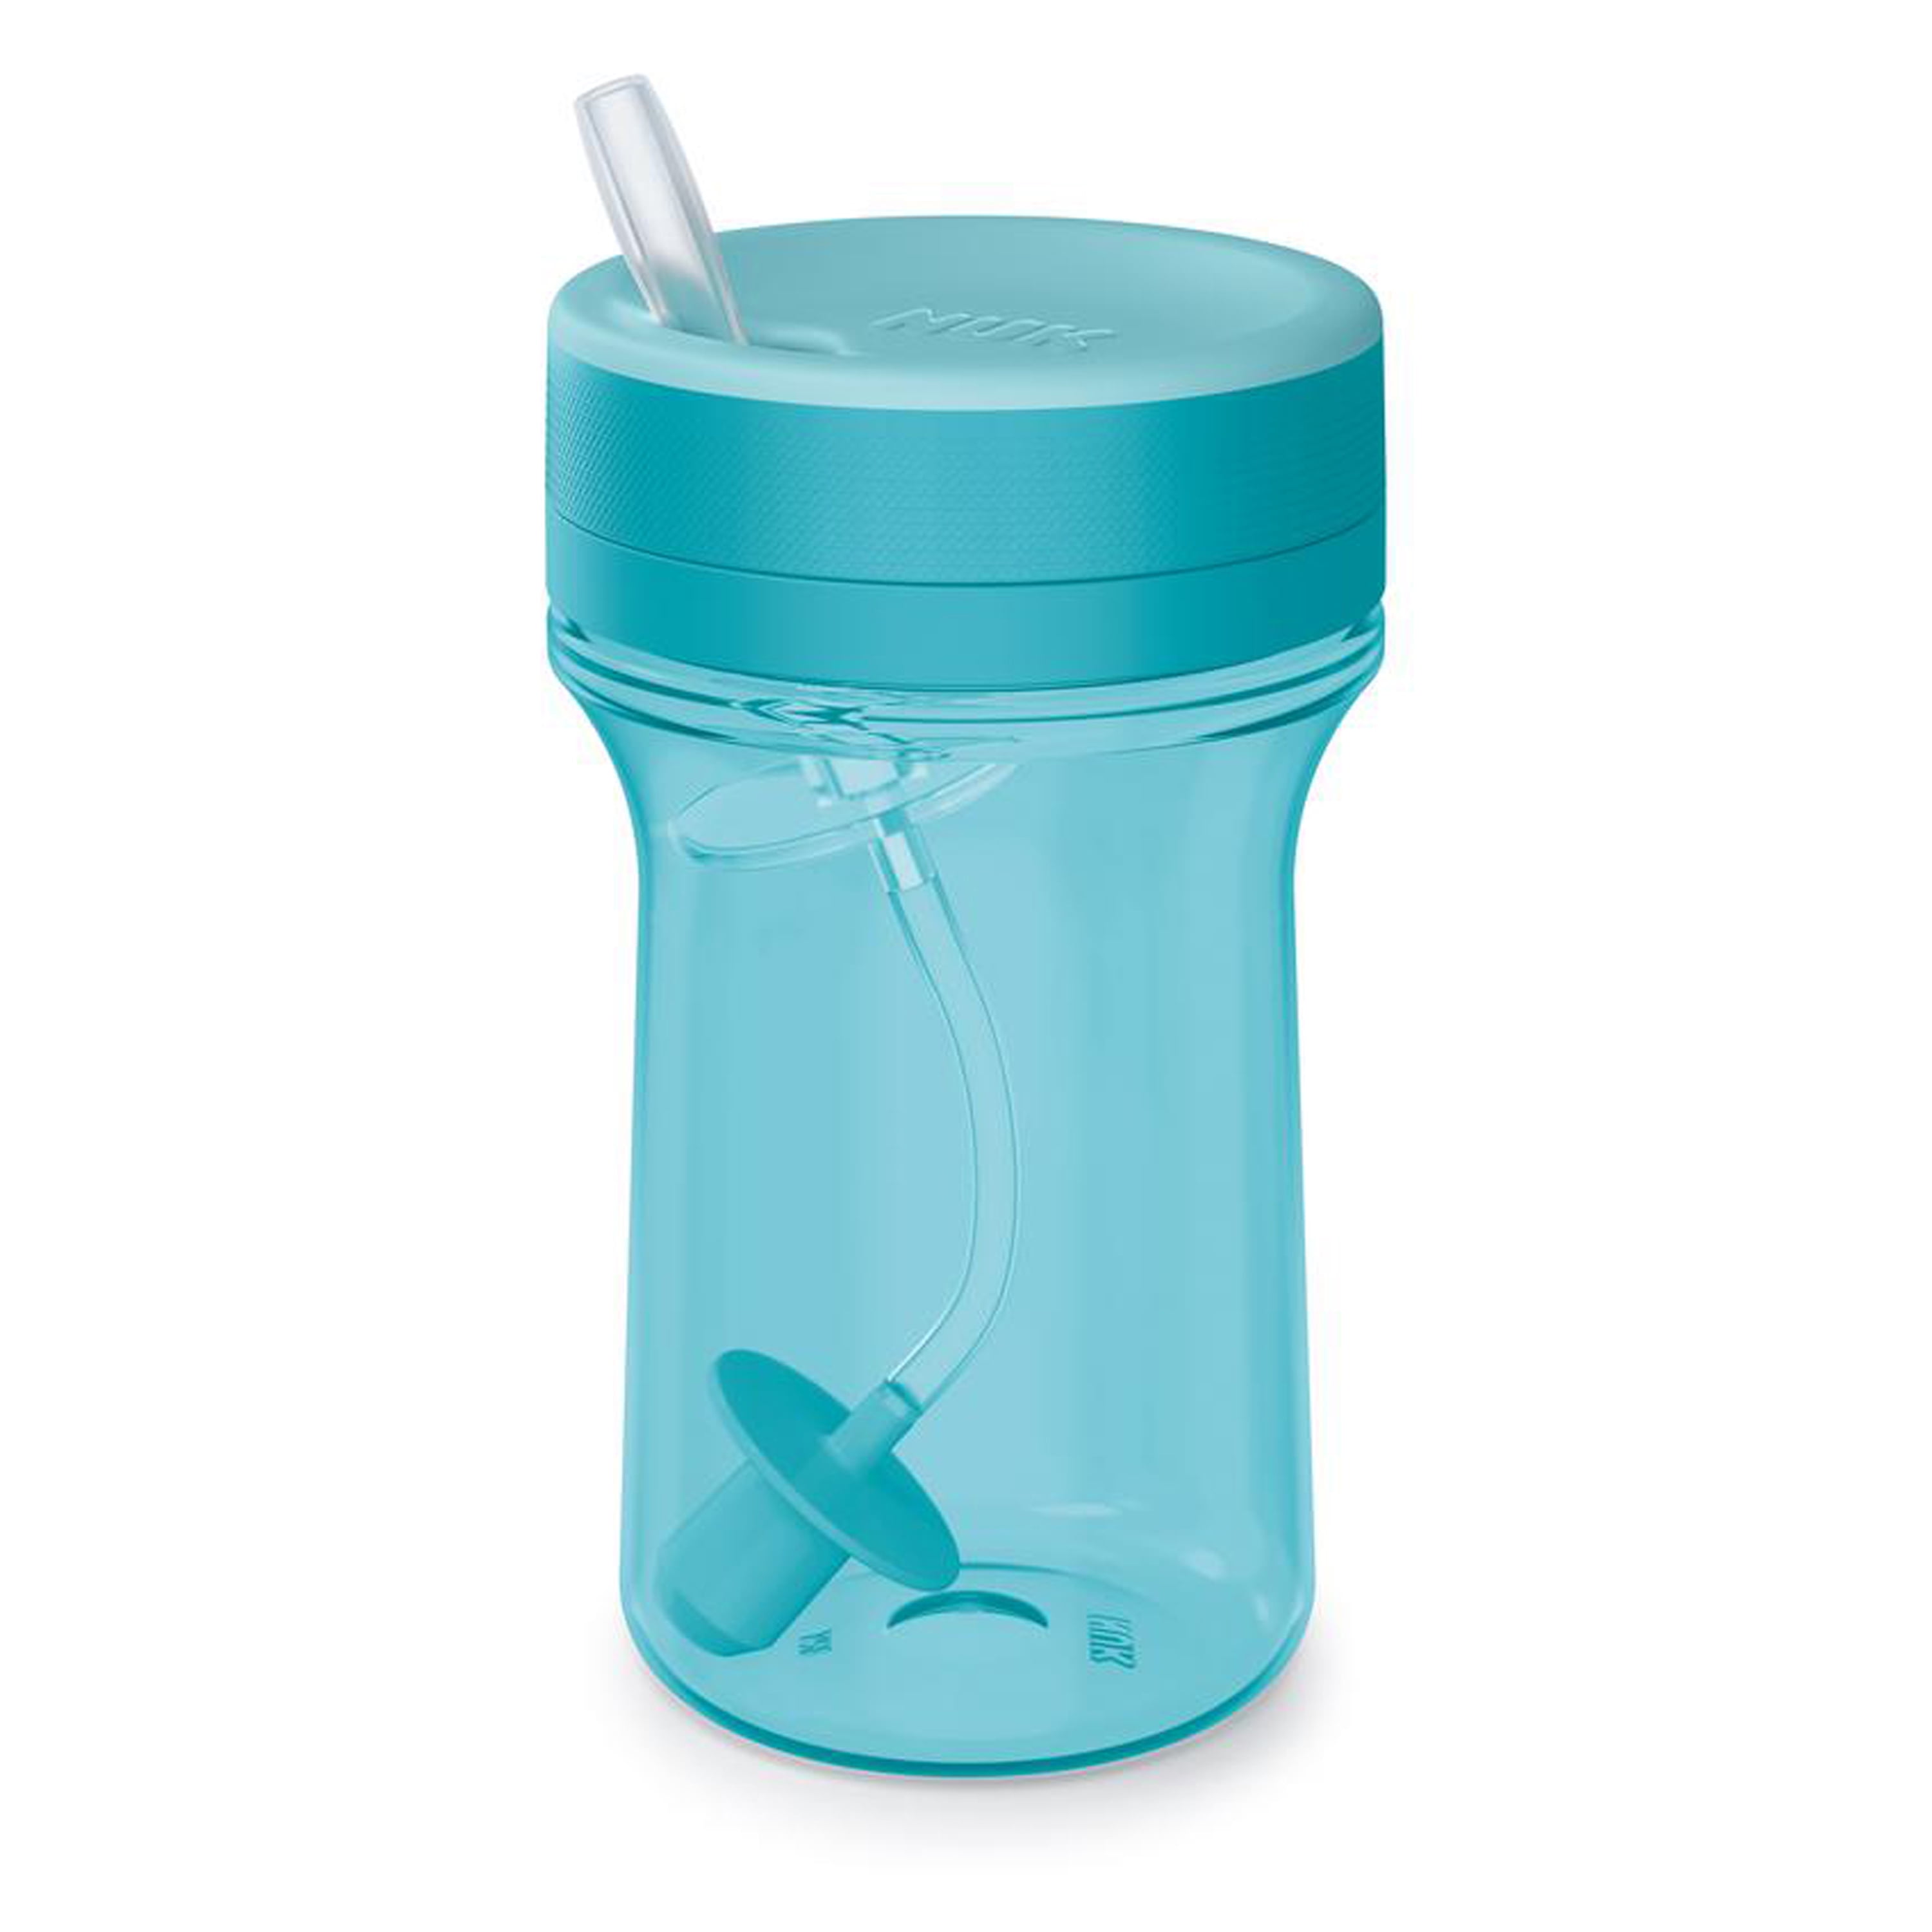 Nuk Learner Straw Cup, 10 oz - Toddler Cup with Soft Straw for Easy Drinking, 8 Months and Up